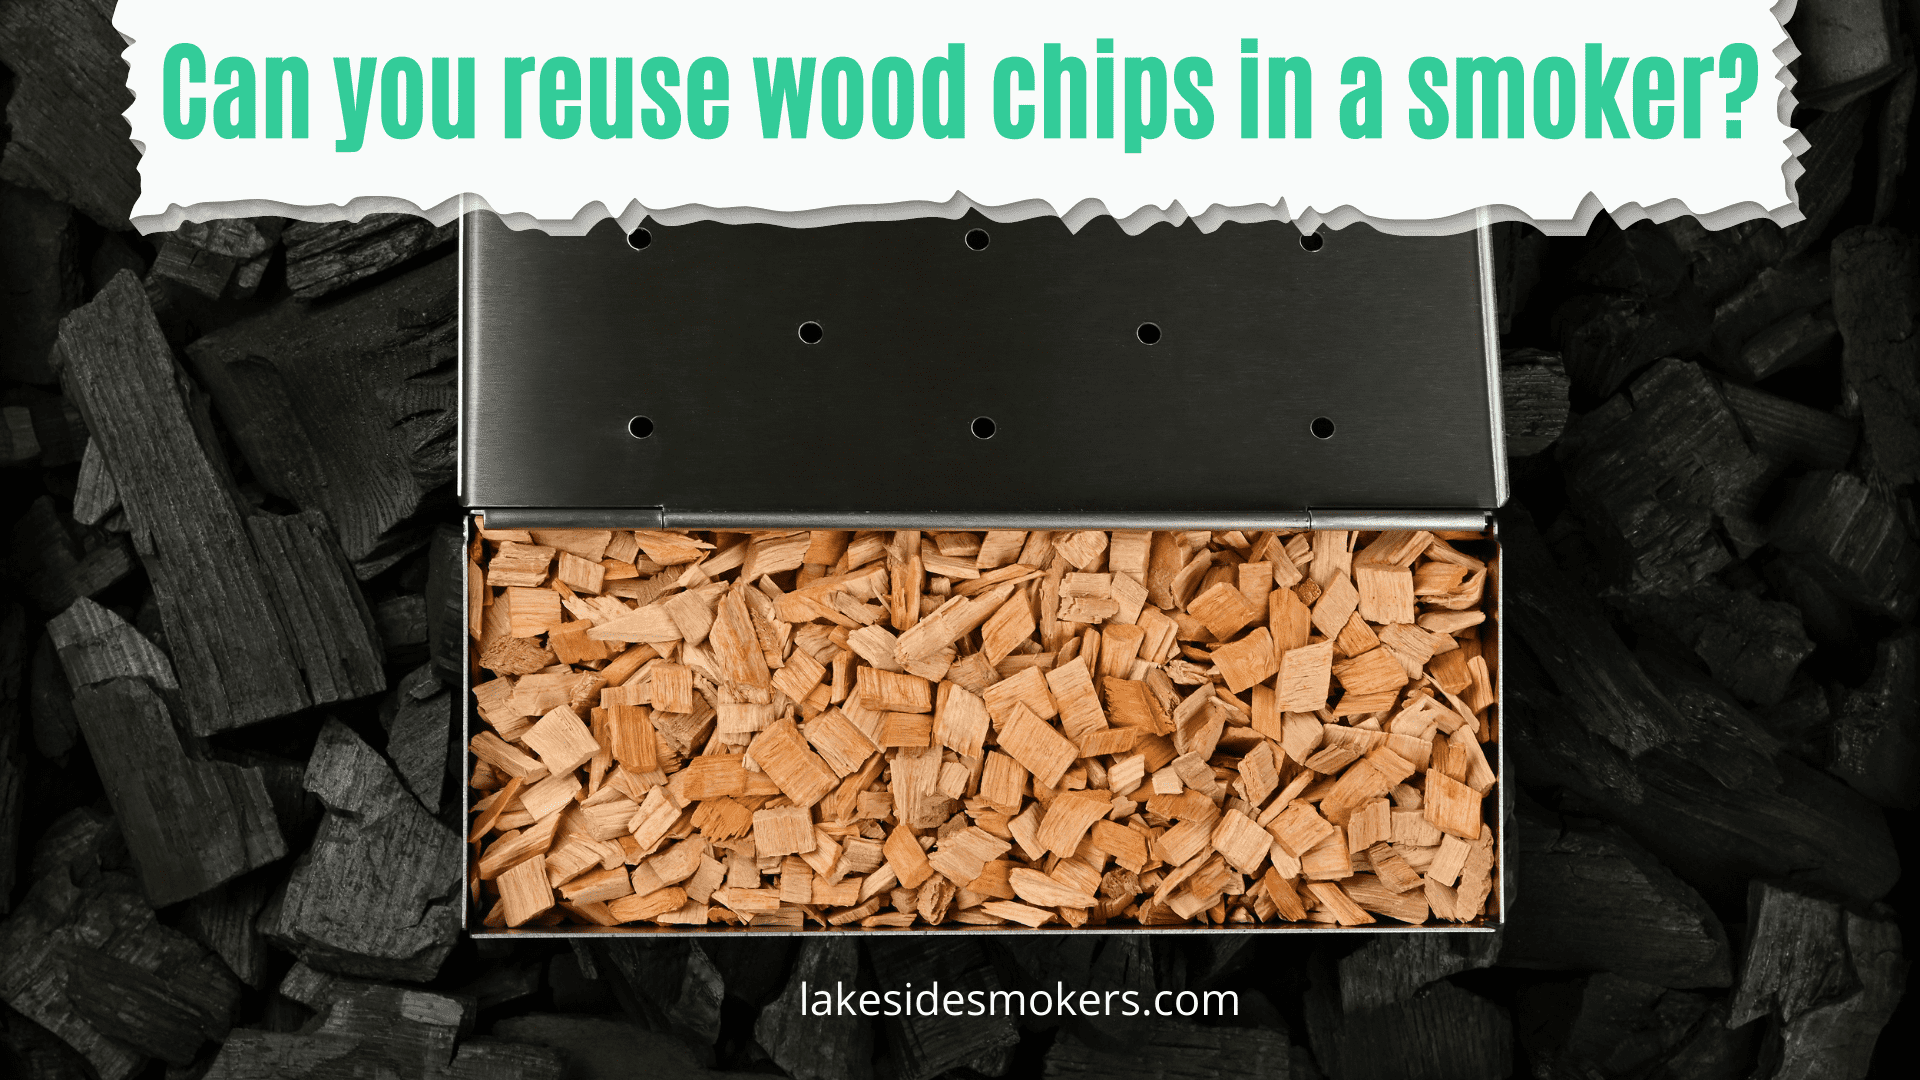 Can you reuse wood chips in a smoker? Generally, no